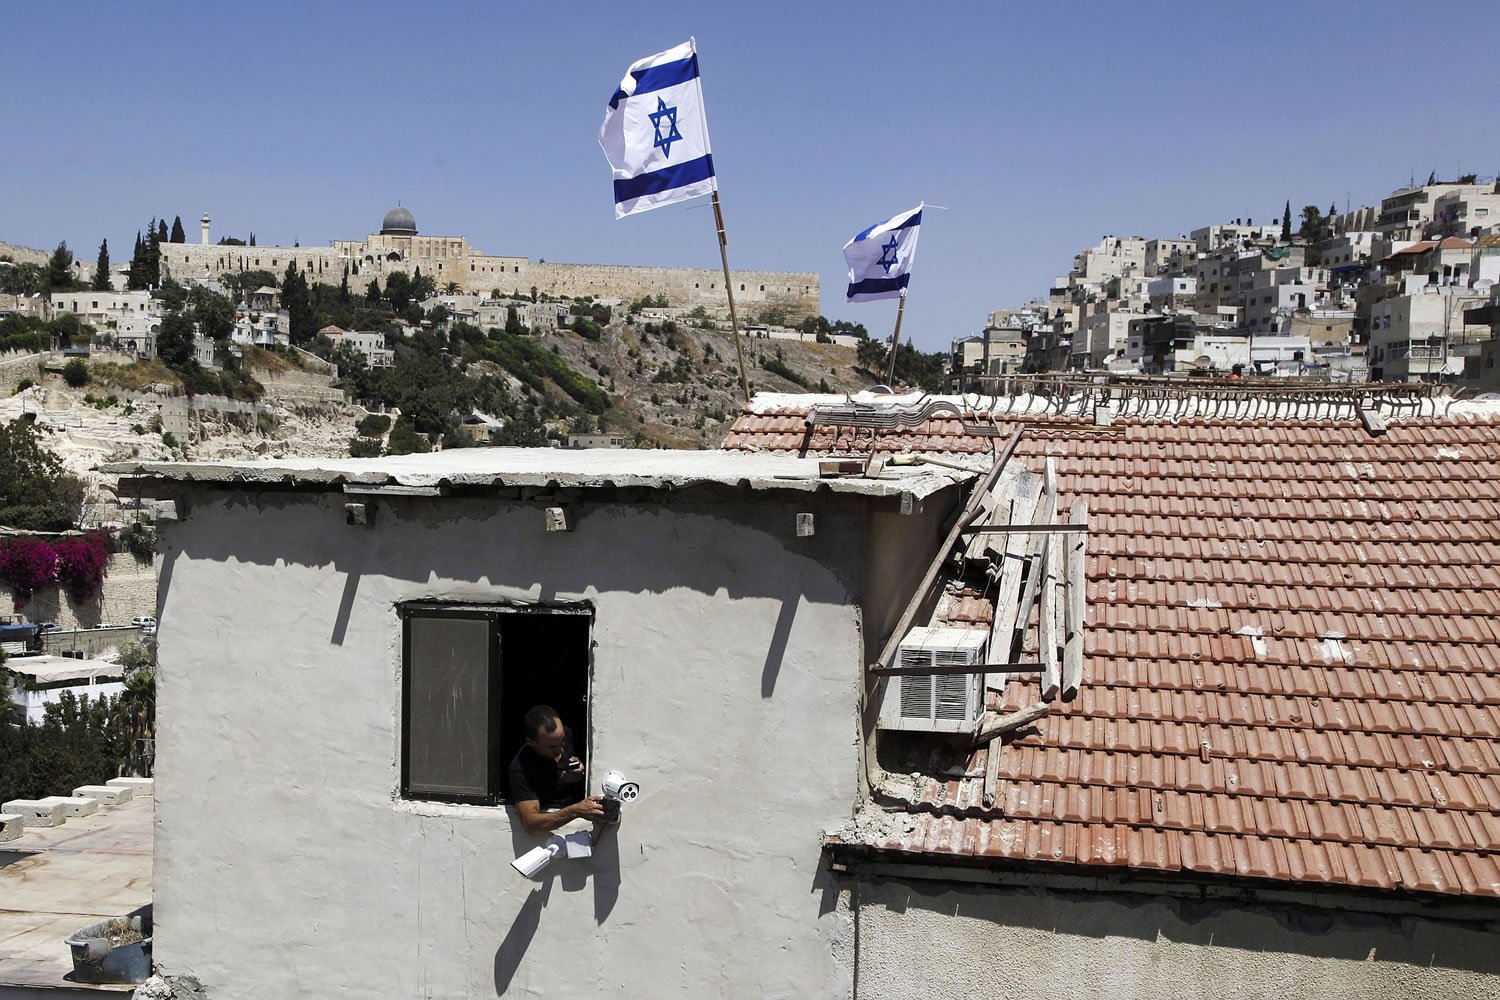 A man leans out a window of a house Thursday in Silwan neighborhood of east Jerusalem with Israeli flags flying above.